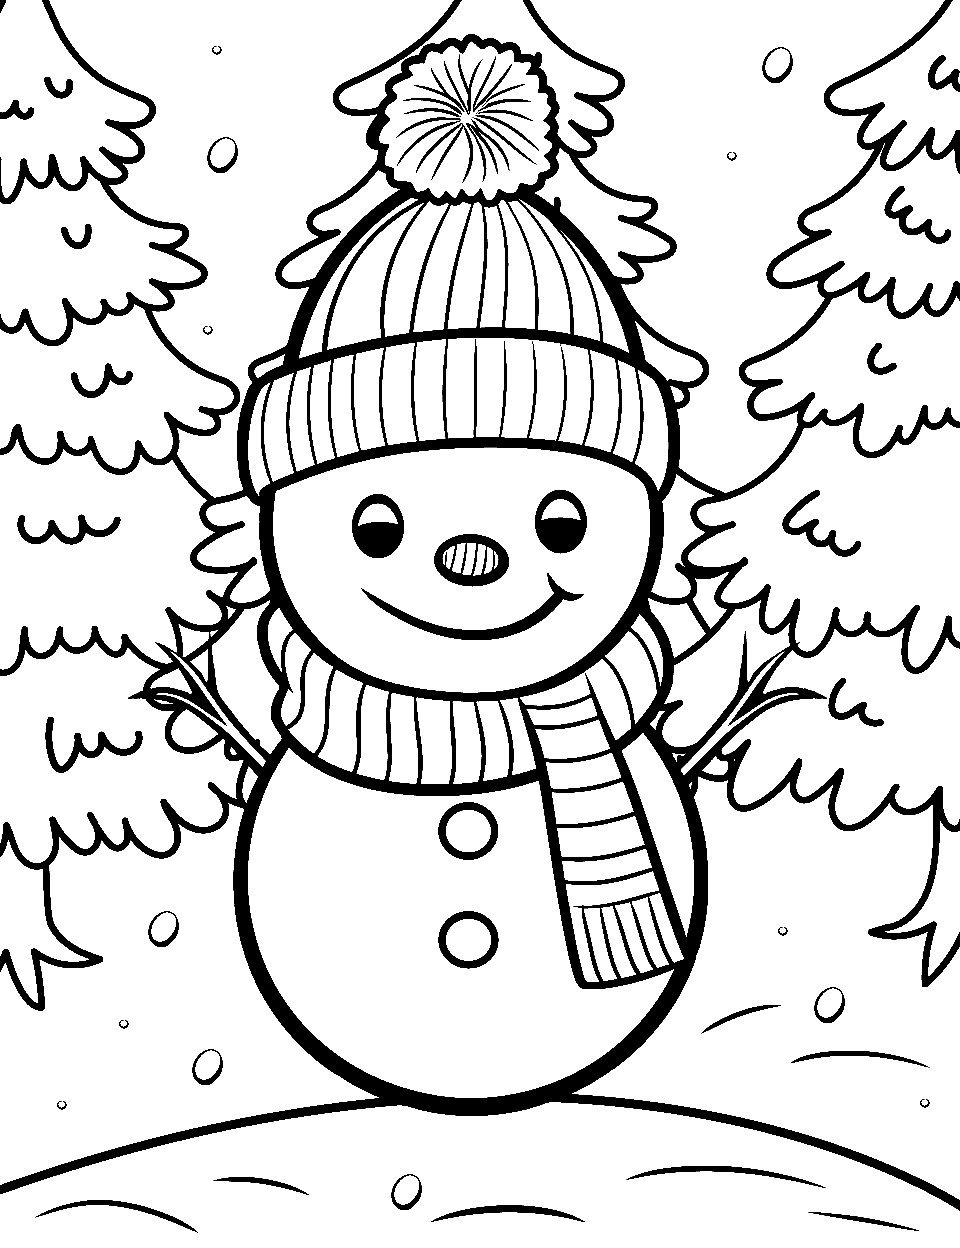 Snowman Adventure Coloring Page - A playful snowman with a carrot nose, exploring a snowy forest.